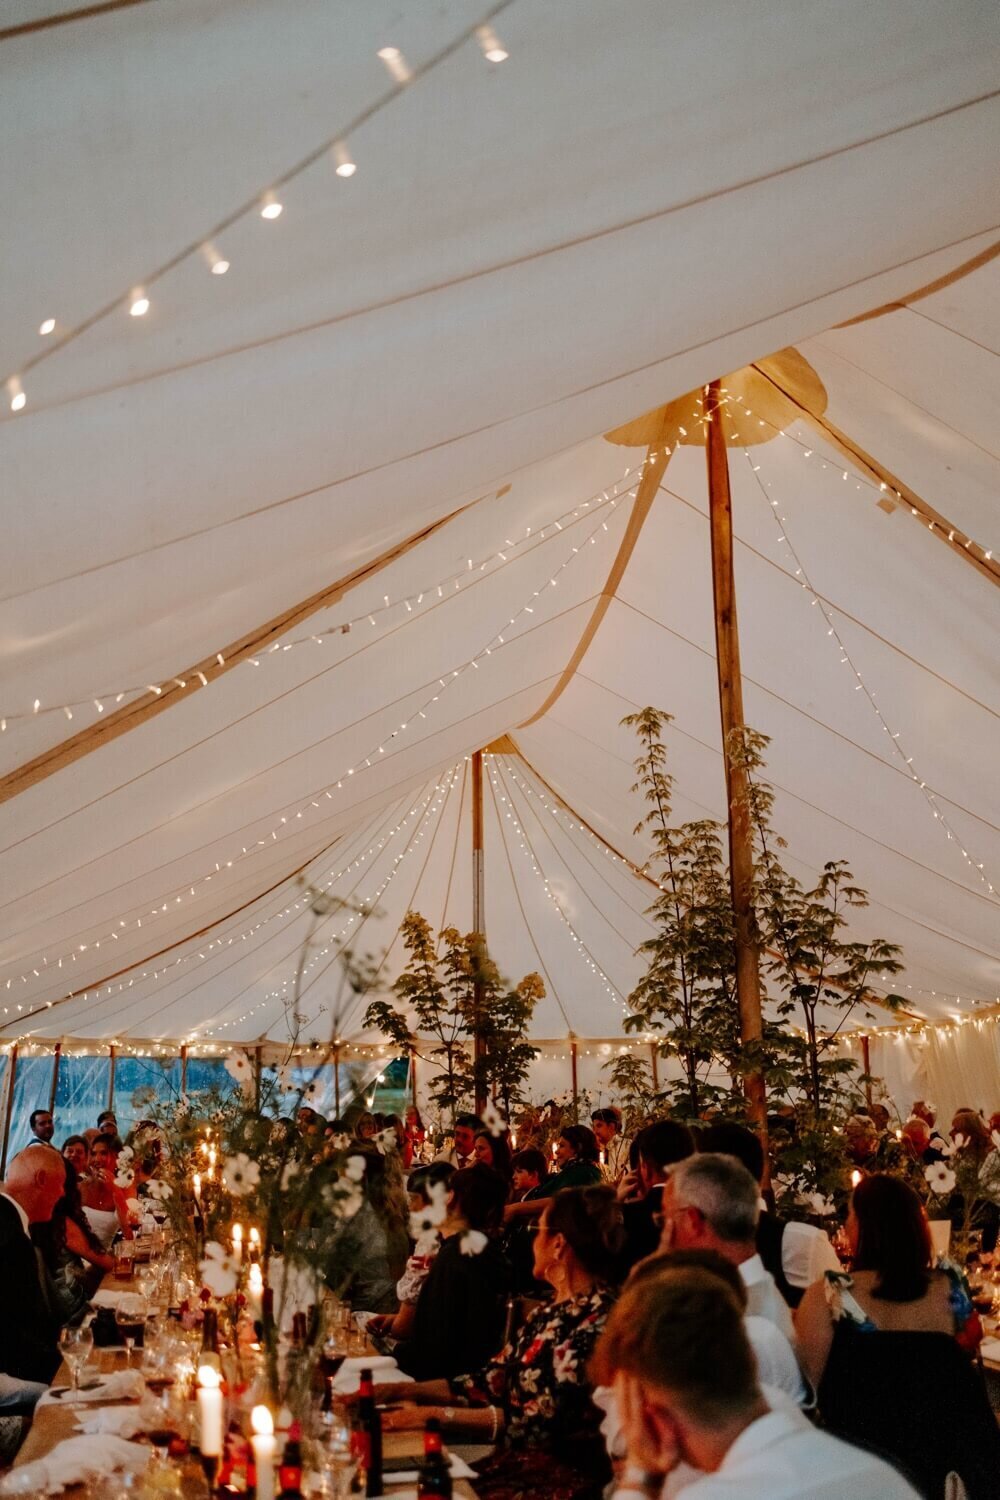 A wedding breakfast in a pole marquee with people eating and enjoying the evening